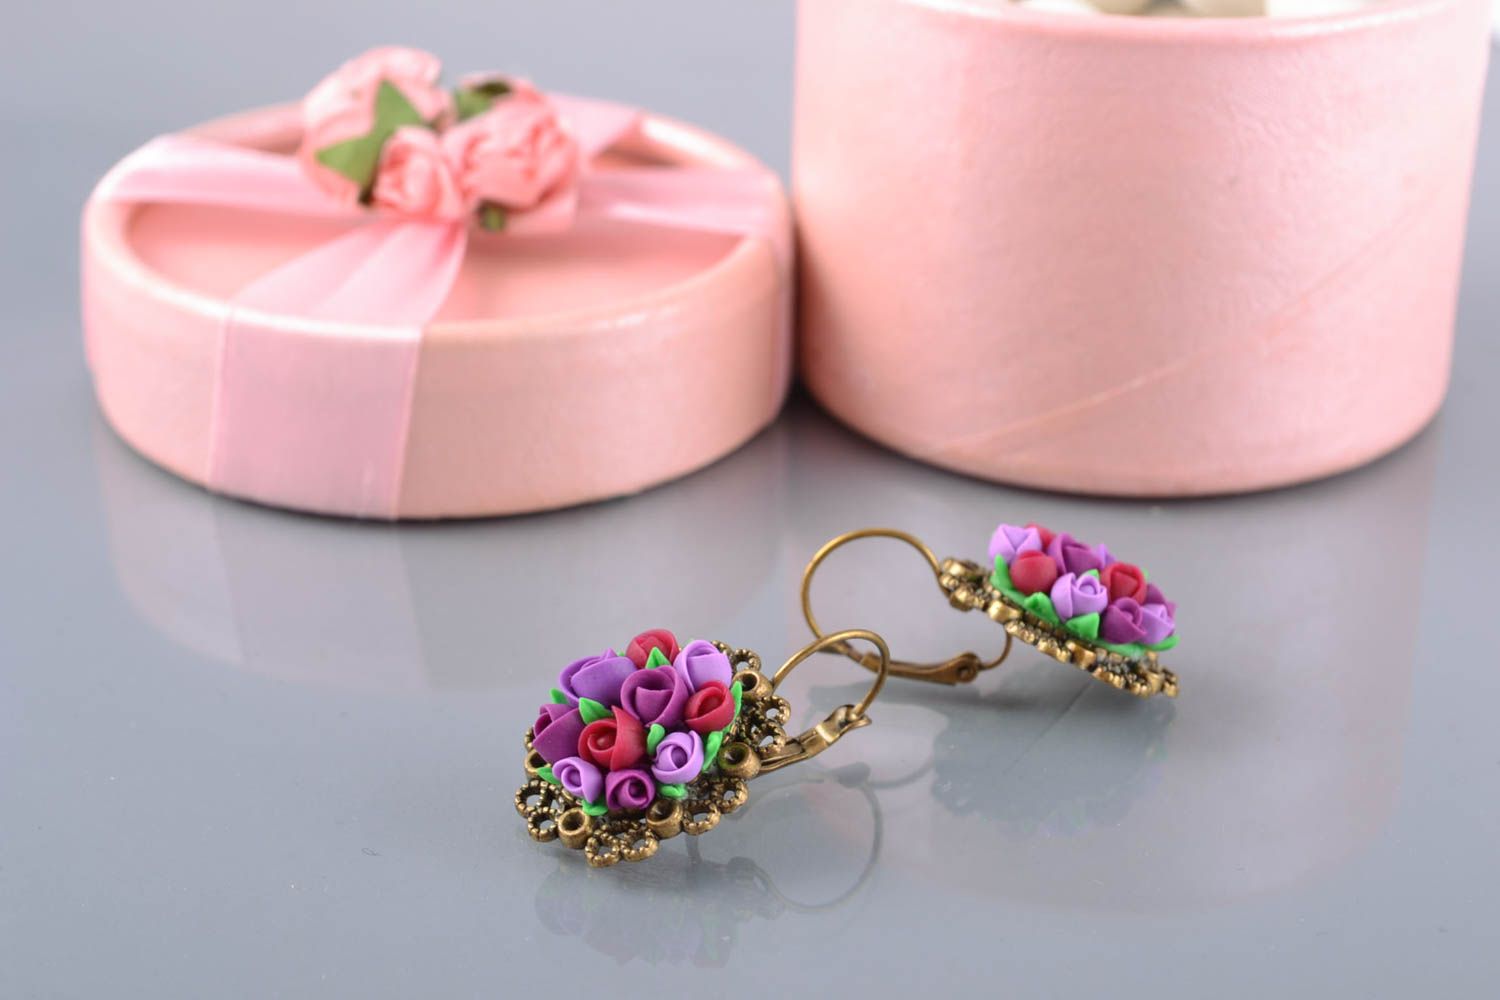 Floral earrings made of polymer clay and metal photo 1